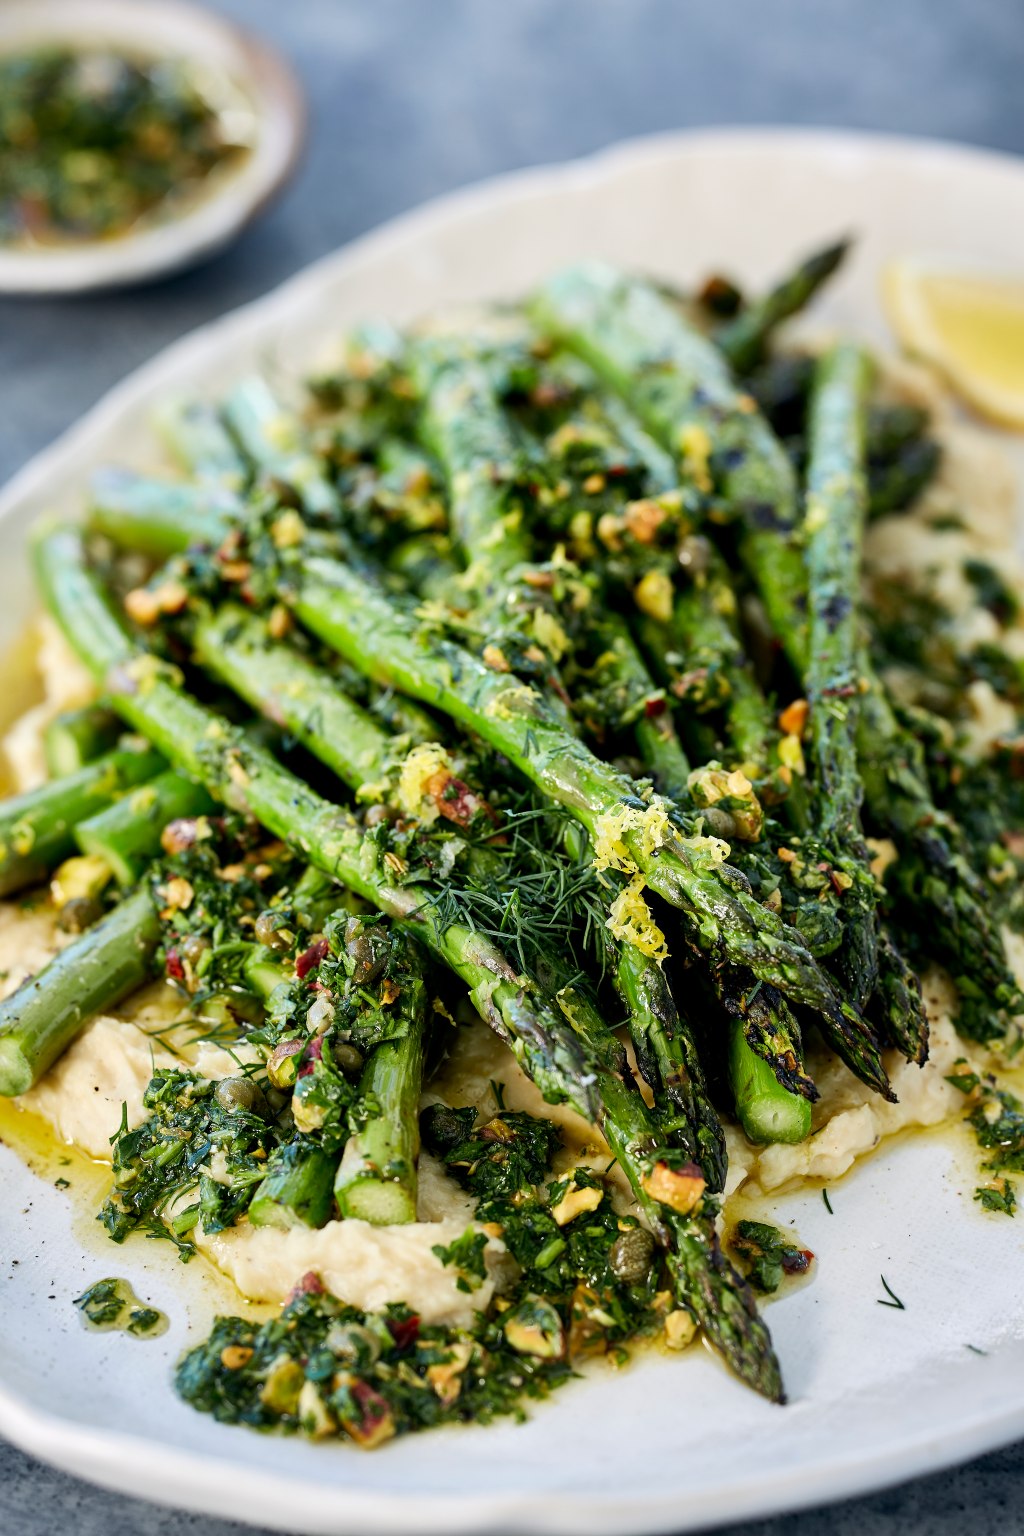 Chargrilled Asparagus with butterbeans,pistachio and caper